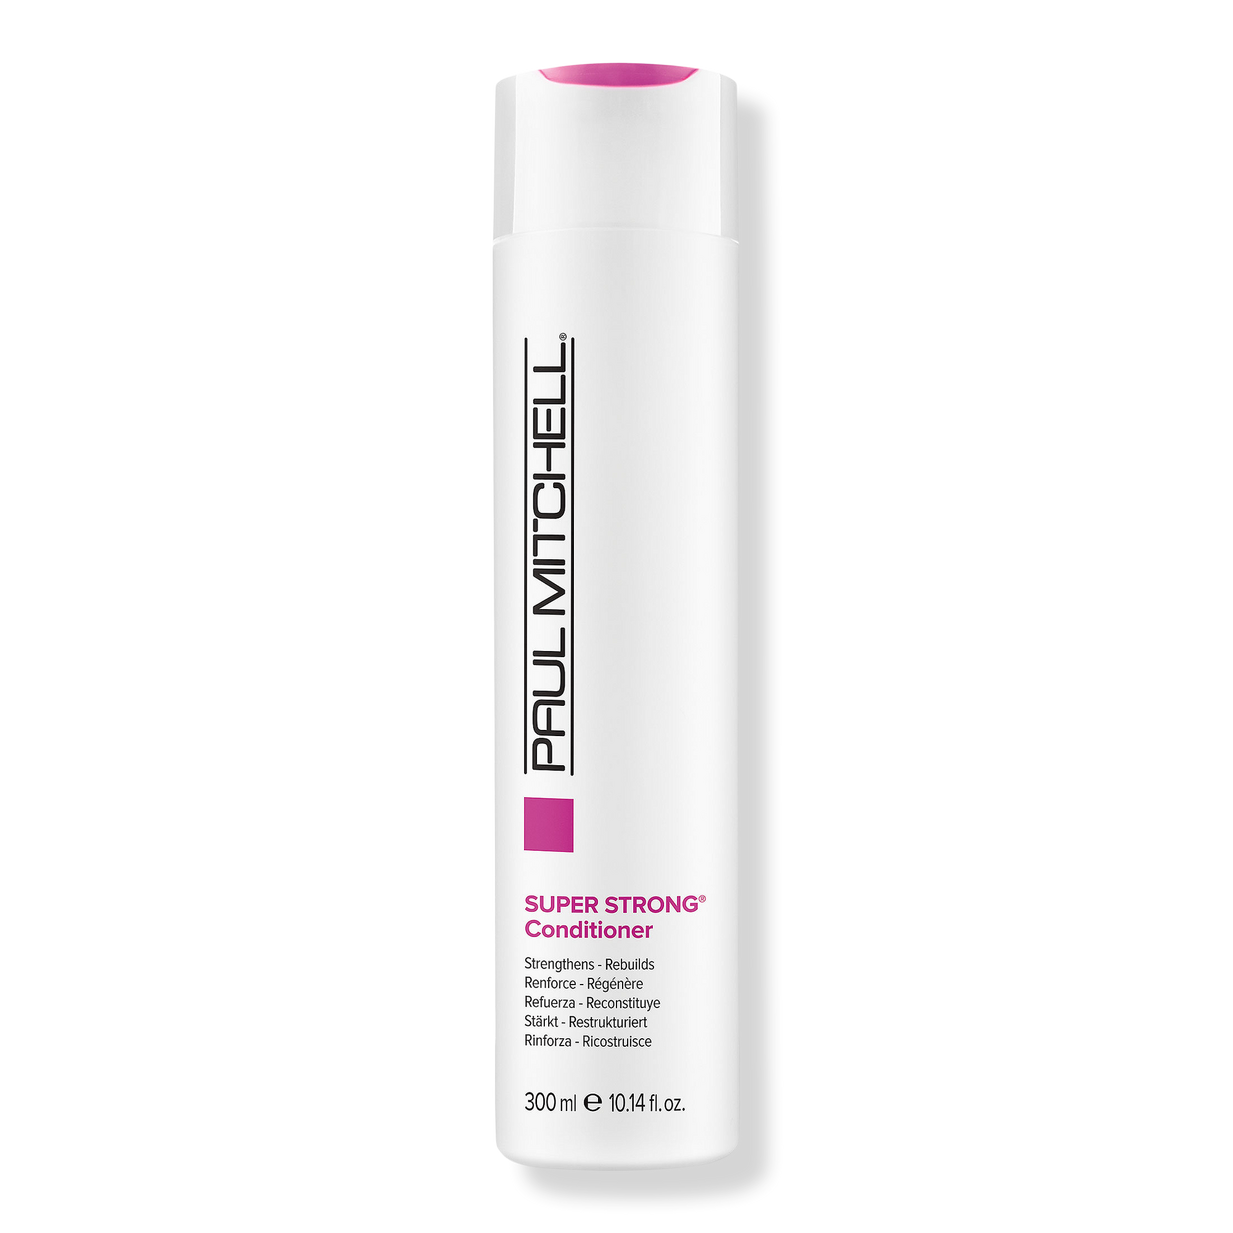 Super Strong Conditioner - Paul Mitchell